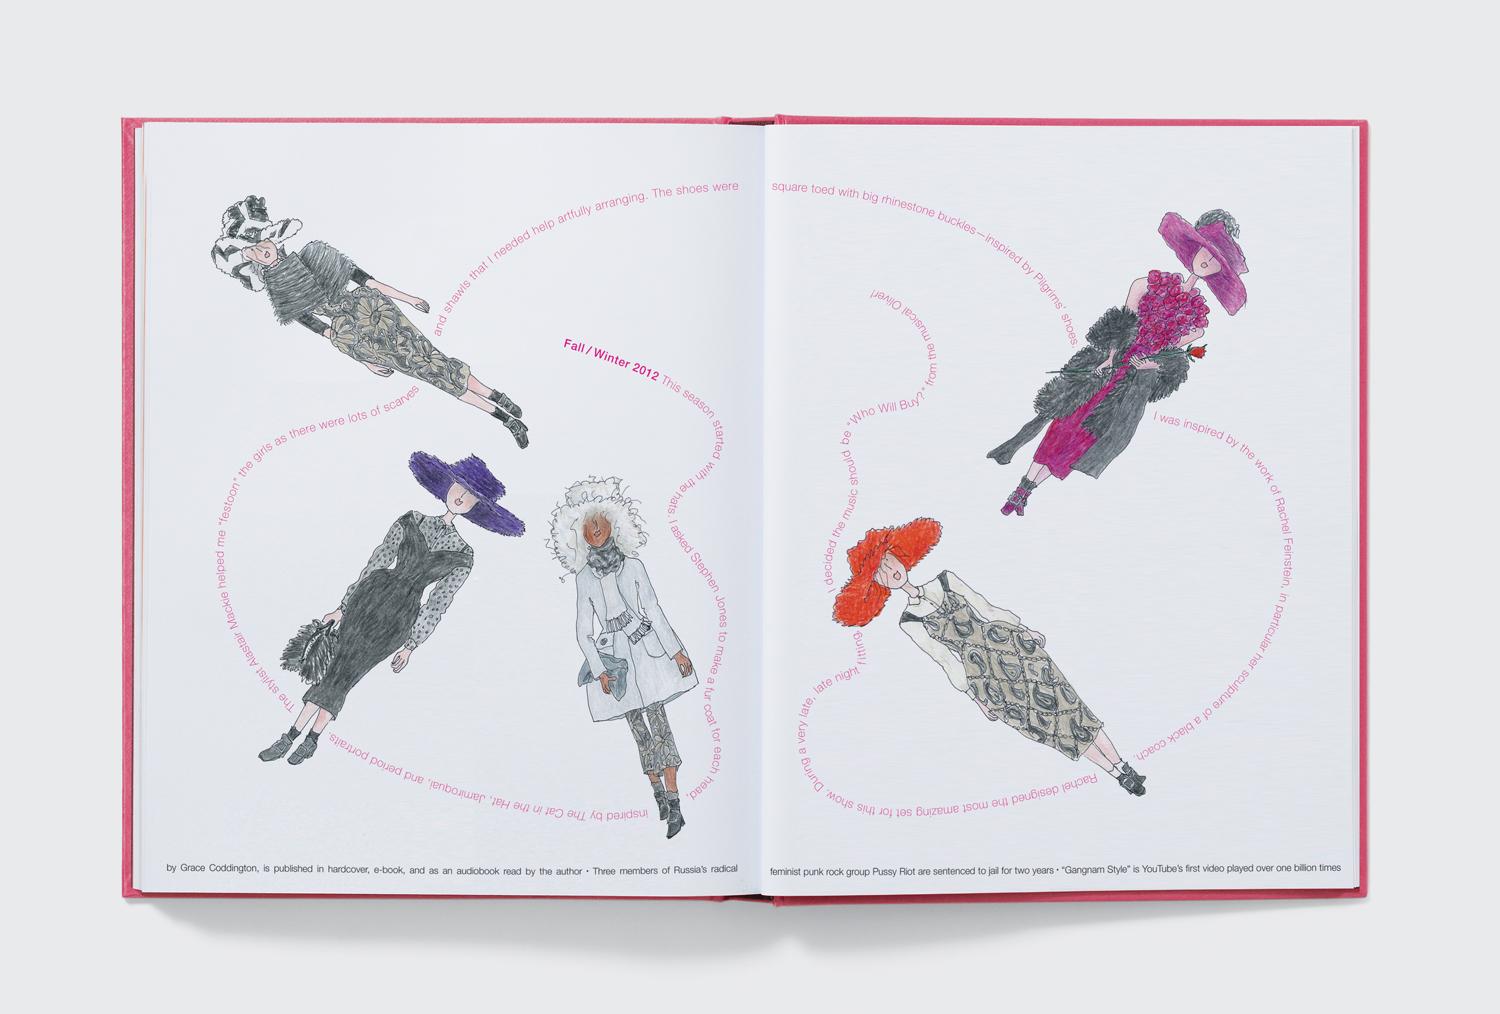 A unique monograph of over 50 collections created by the fashion designer Marc Jacobs in the past 25 years and illustrated by Grace Coddington
In 2016, internationally acclaimed designer Marc Jacobs commissioned his friend and talented illustrator